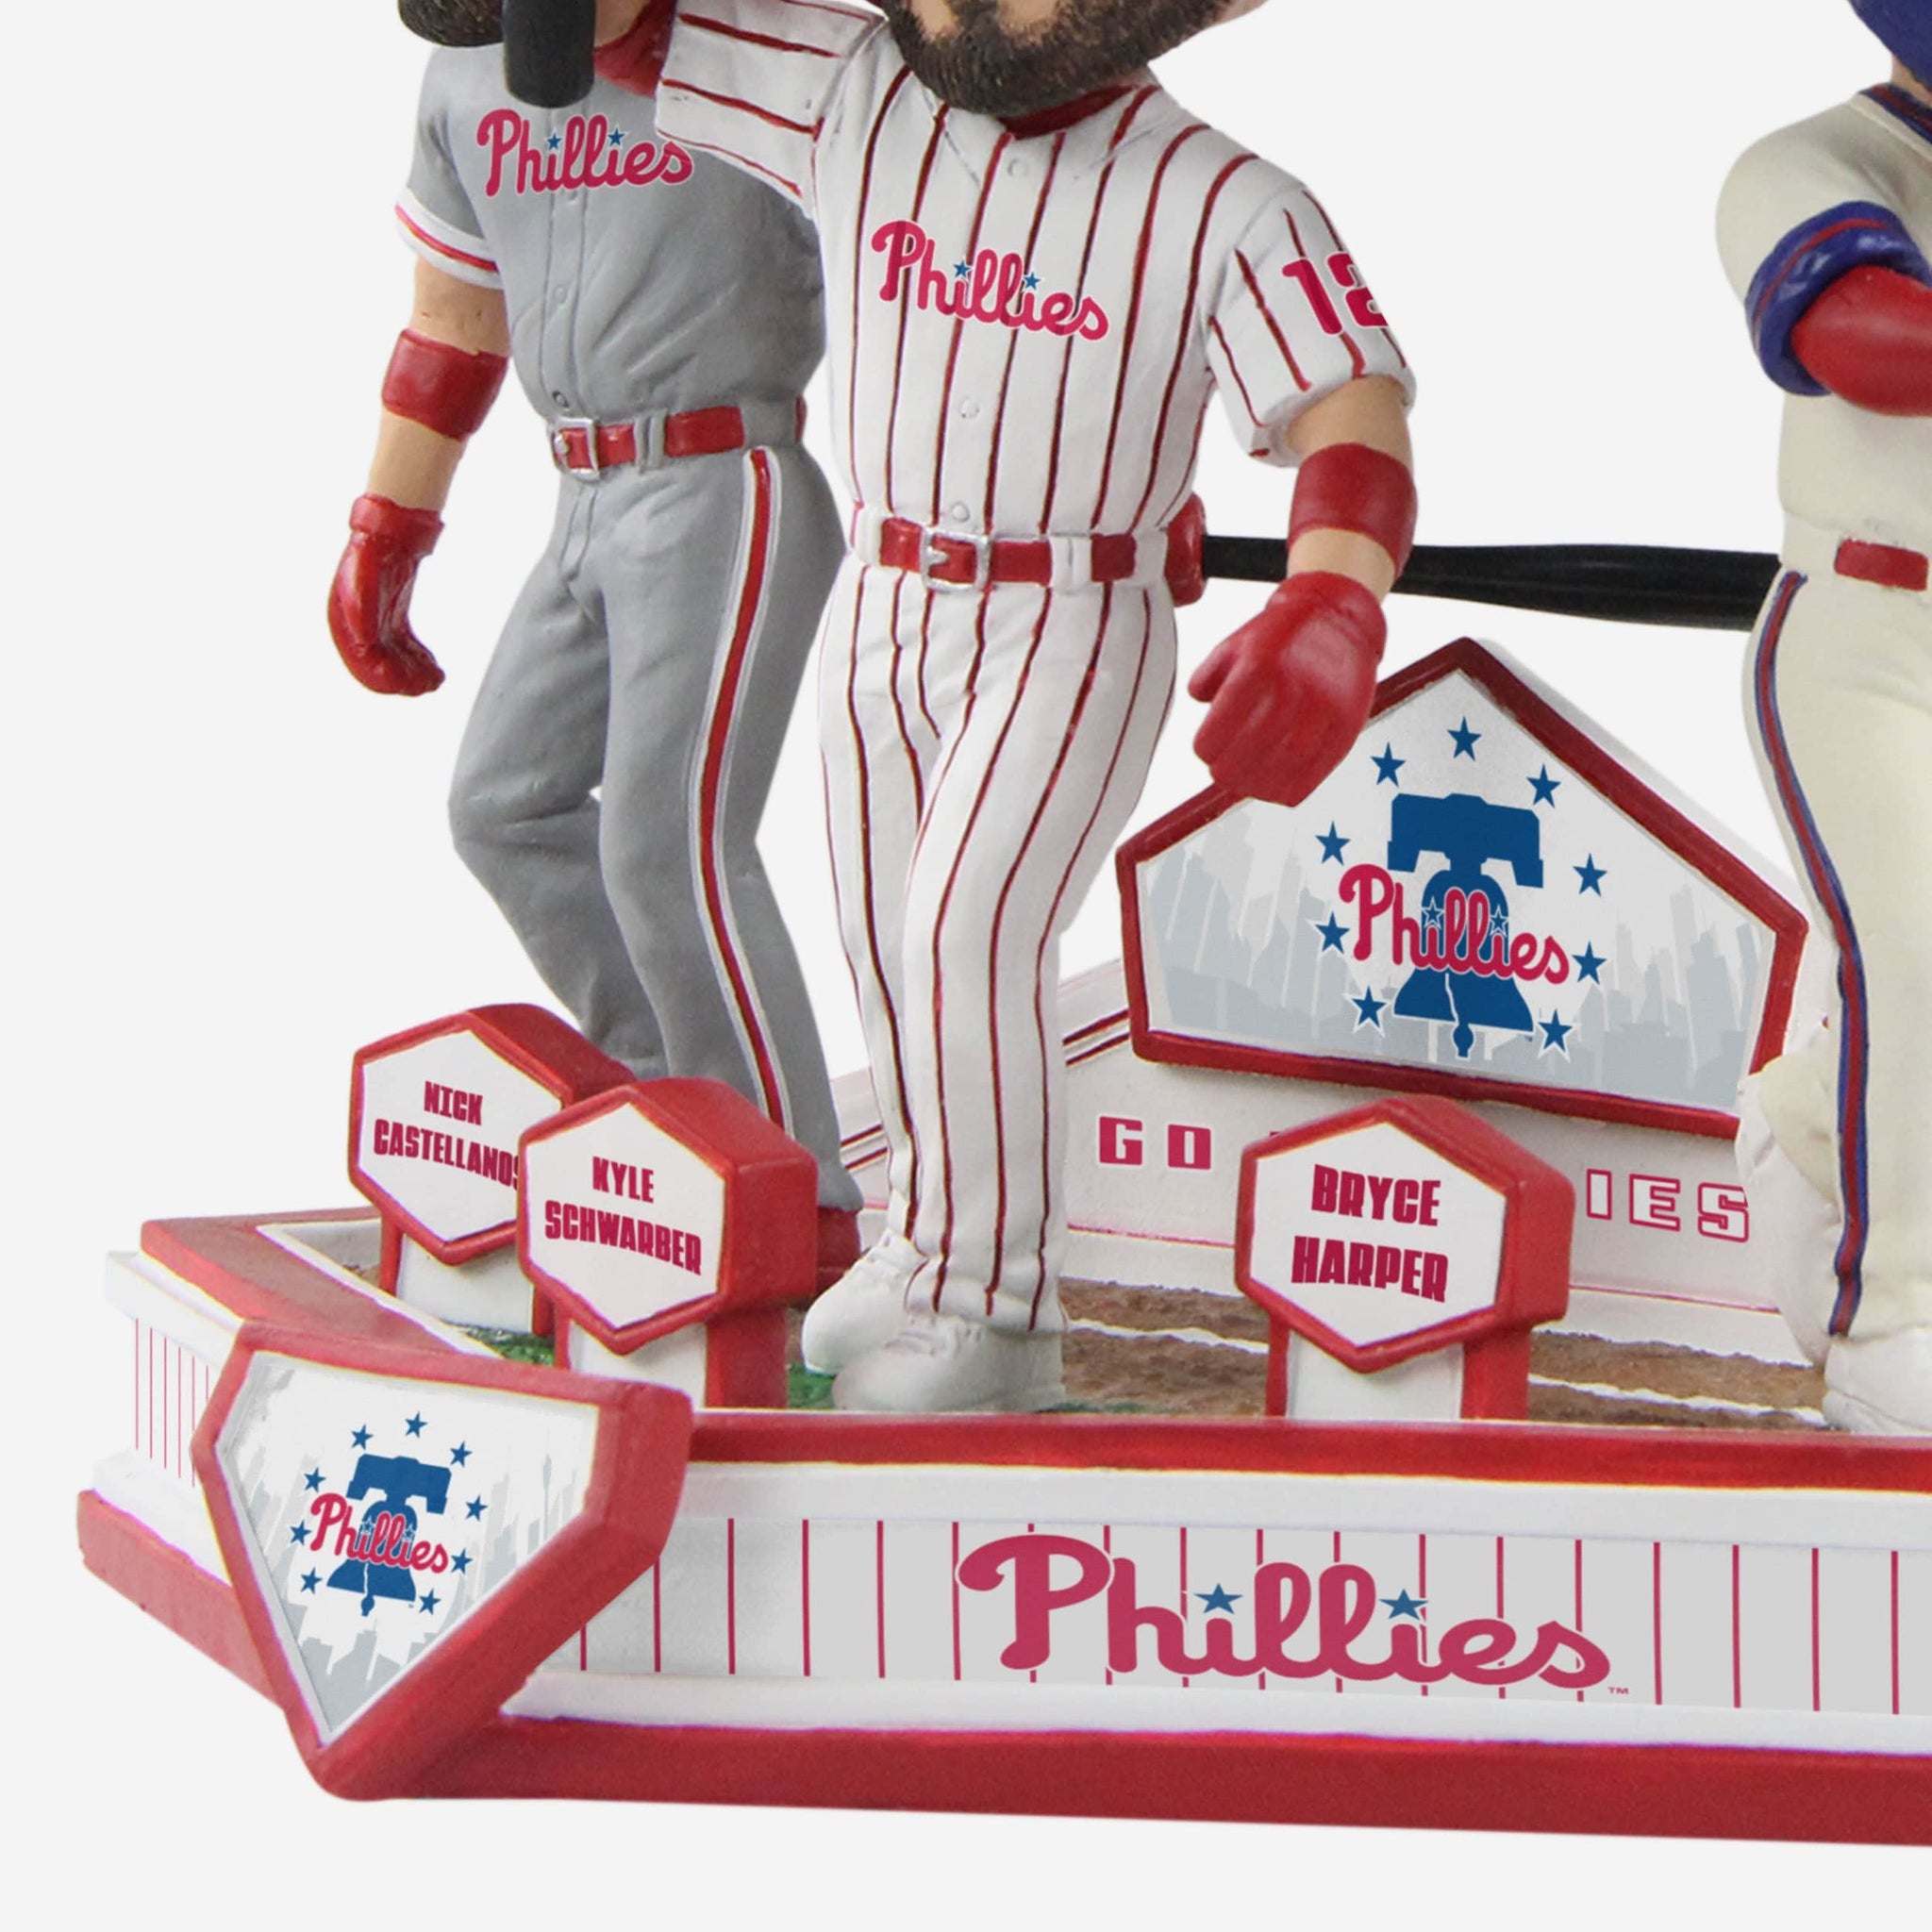 FOCO Releases Philadelphia Phillies “Smash the Bell” Bobblehead Collection  Featuring Harper, Castellanos, and Schwarber - Sports Illustrated Inside  The Phillies